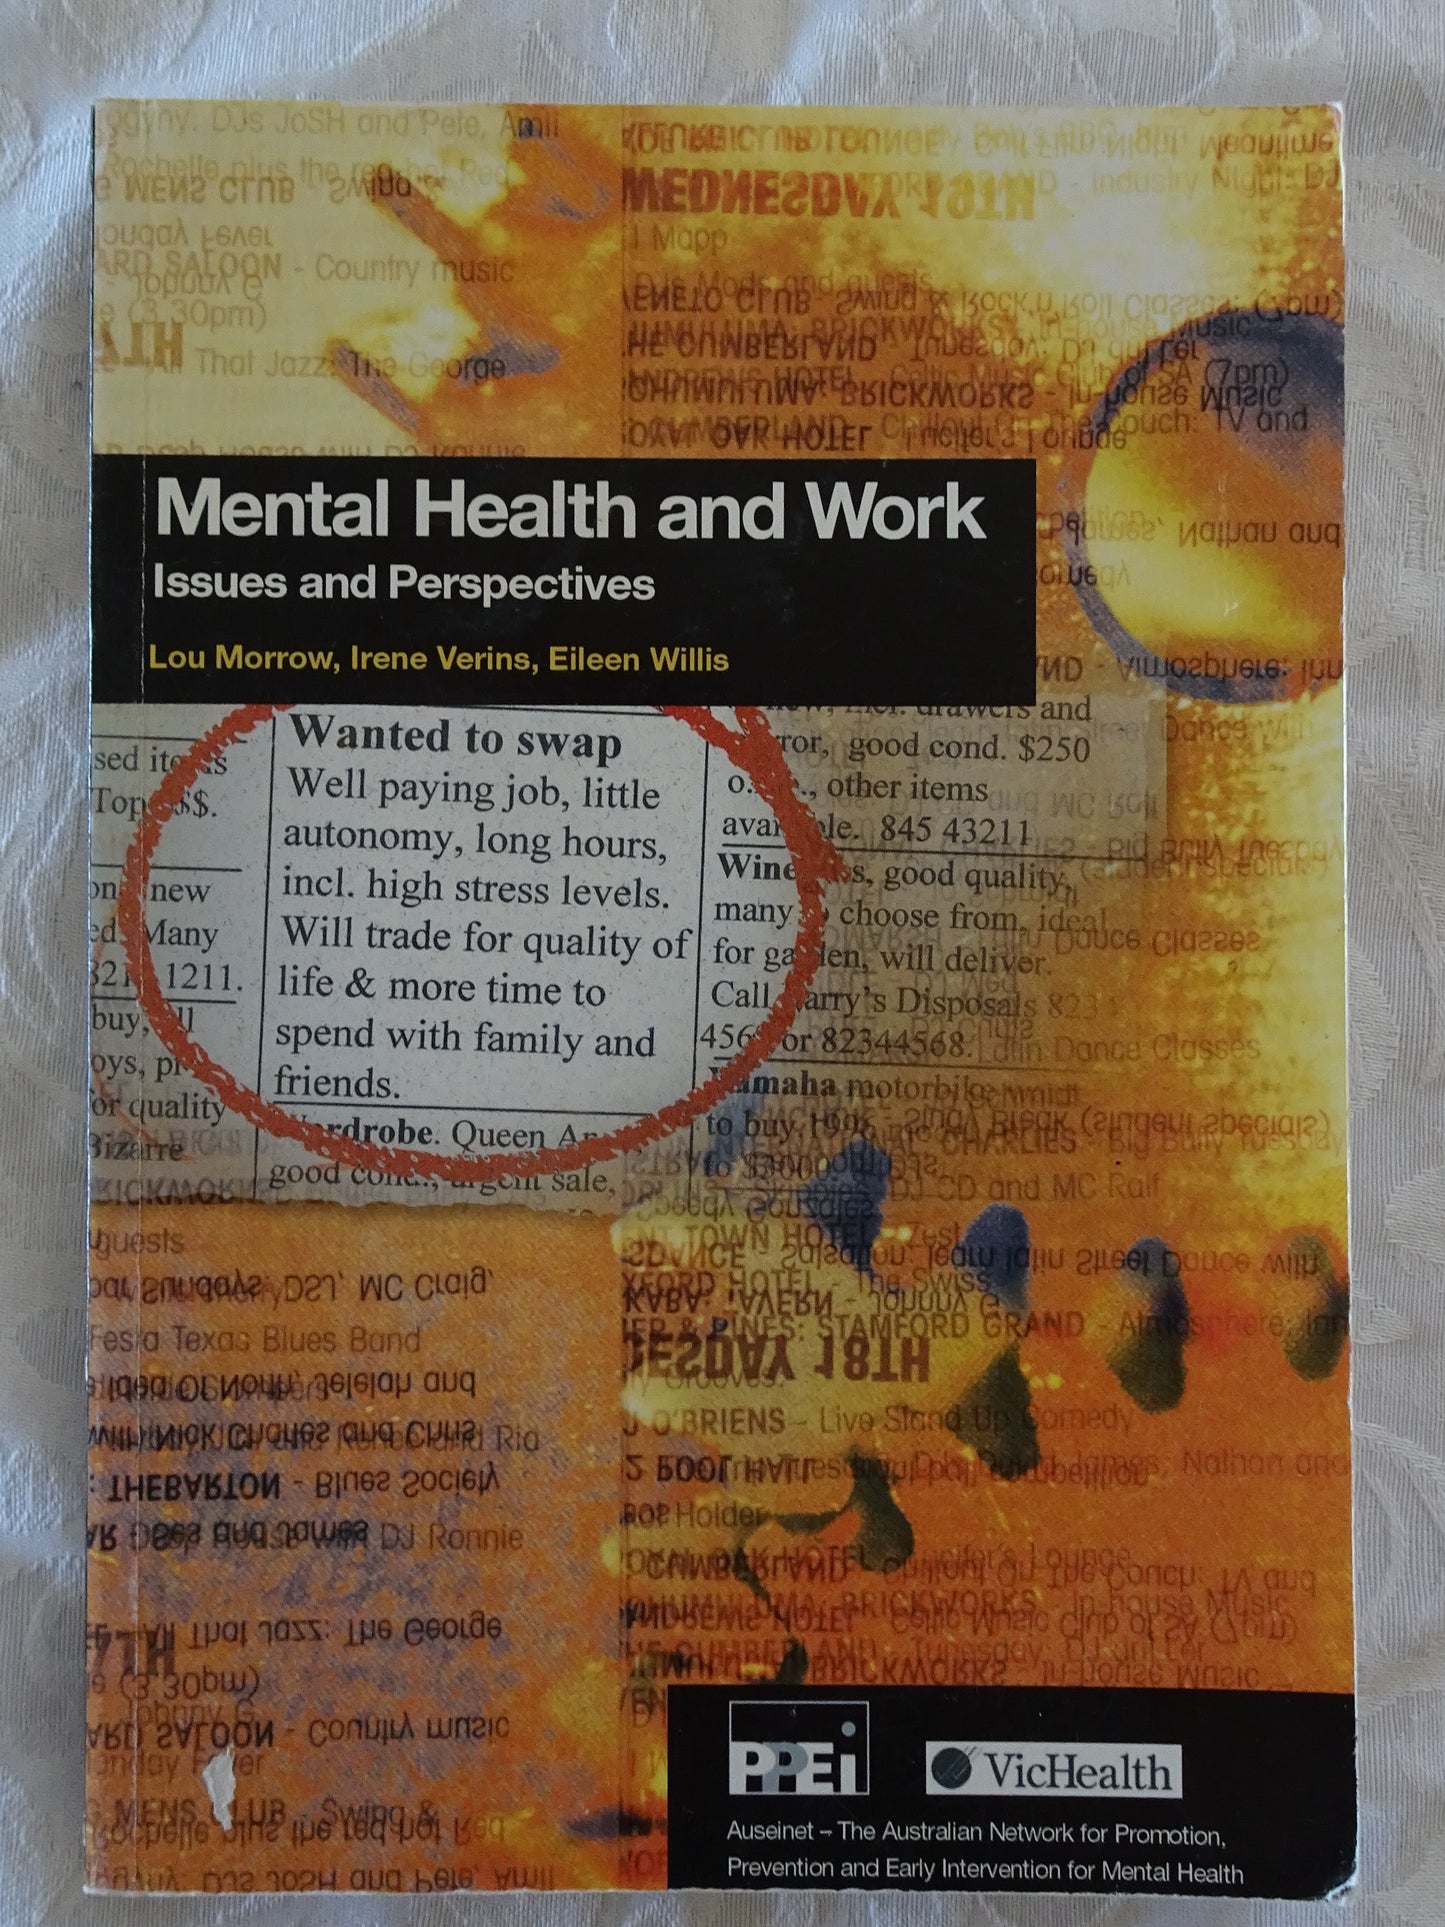 Mental Health and Work by Lou Morrow et al.